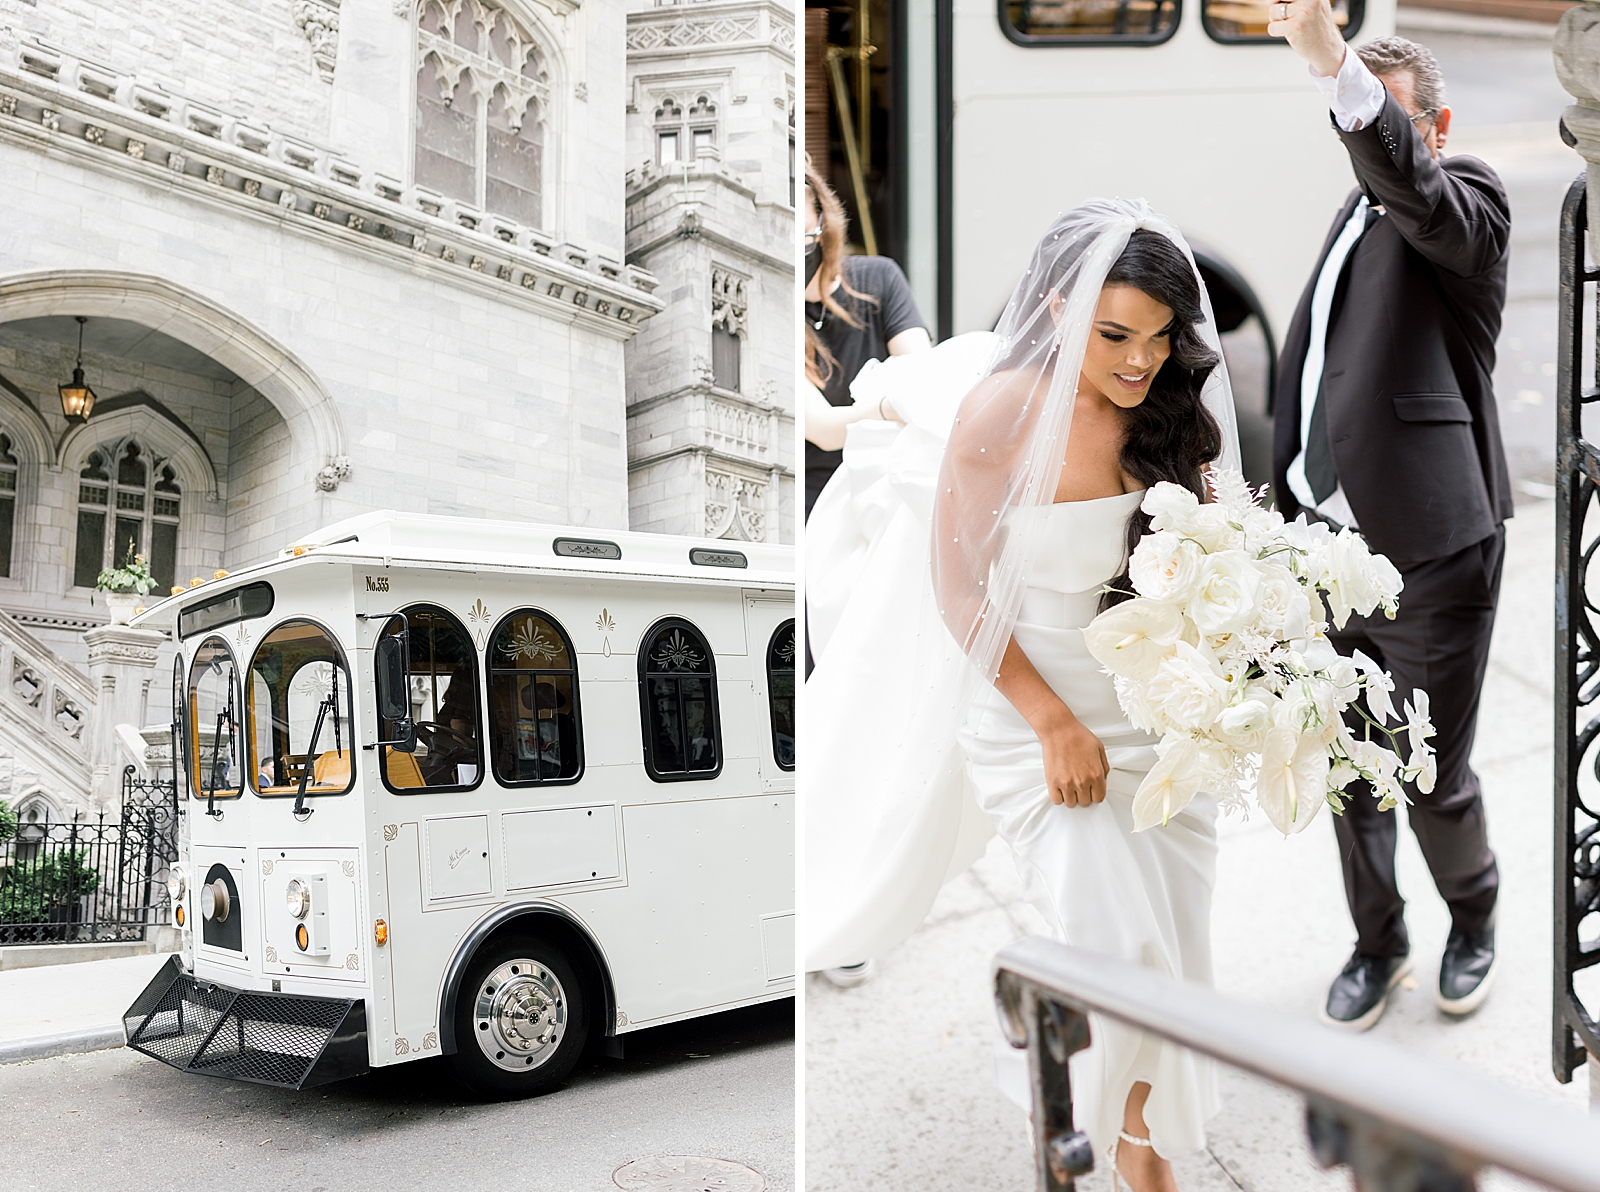 Trolley coming up to church and Bride entering church